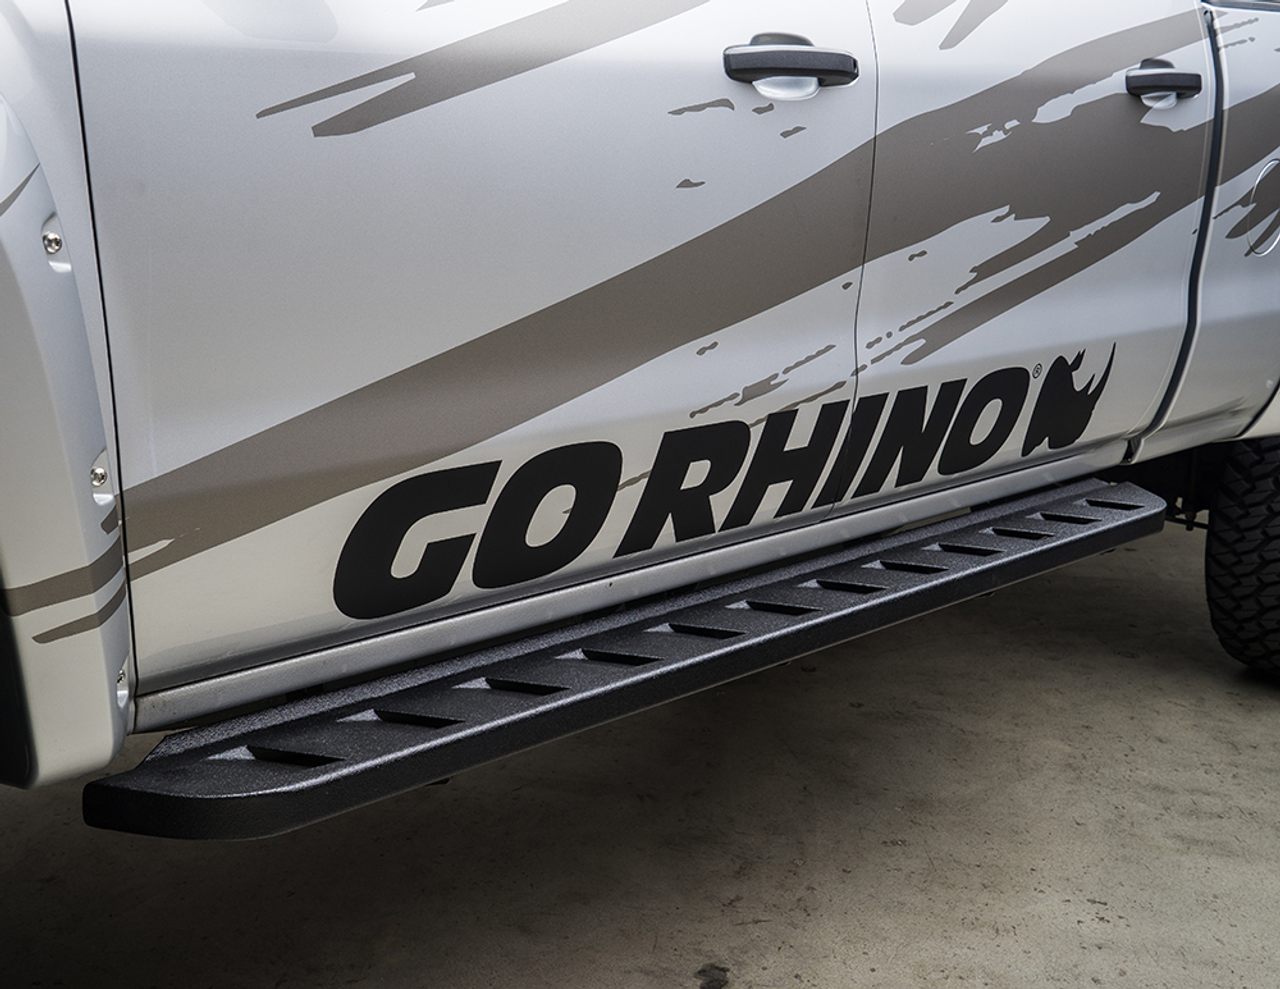 Go Rhino 6341808720PC Ford, F-250, F-350, 1999 - 2016, RB10 Running Boards - Complete Kit: RB10 Boards + Brackets + 2 pair RB10 Drop Steps, Galvanized Steel, Textured black, 630087PC RB10 + 6941765 RB Brackets + (2) 69420000PC Drop Down Steps